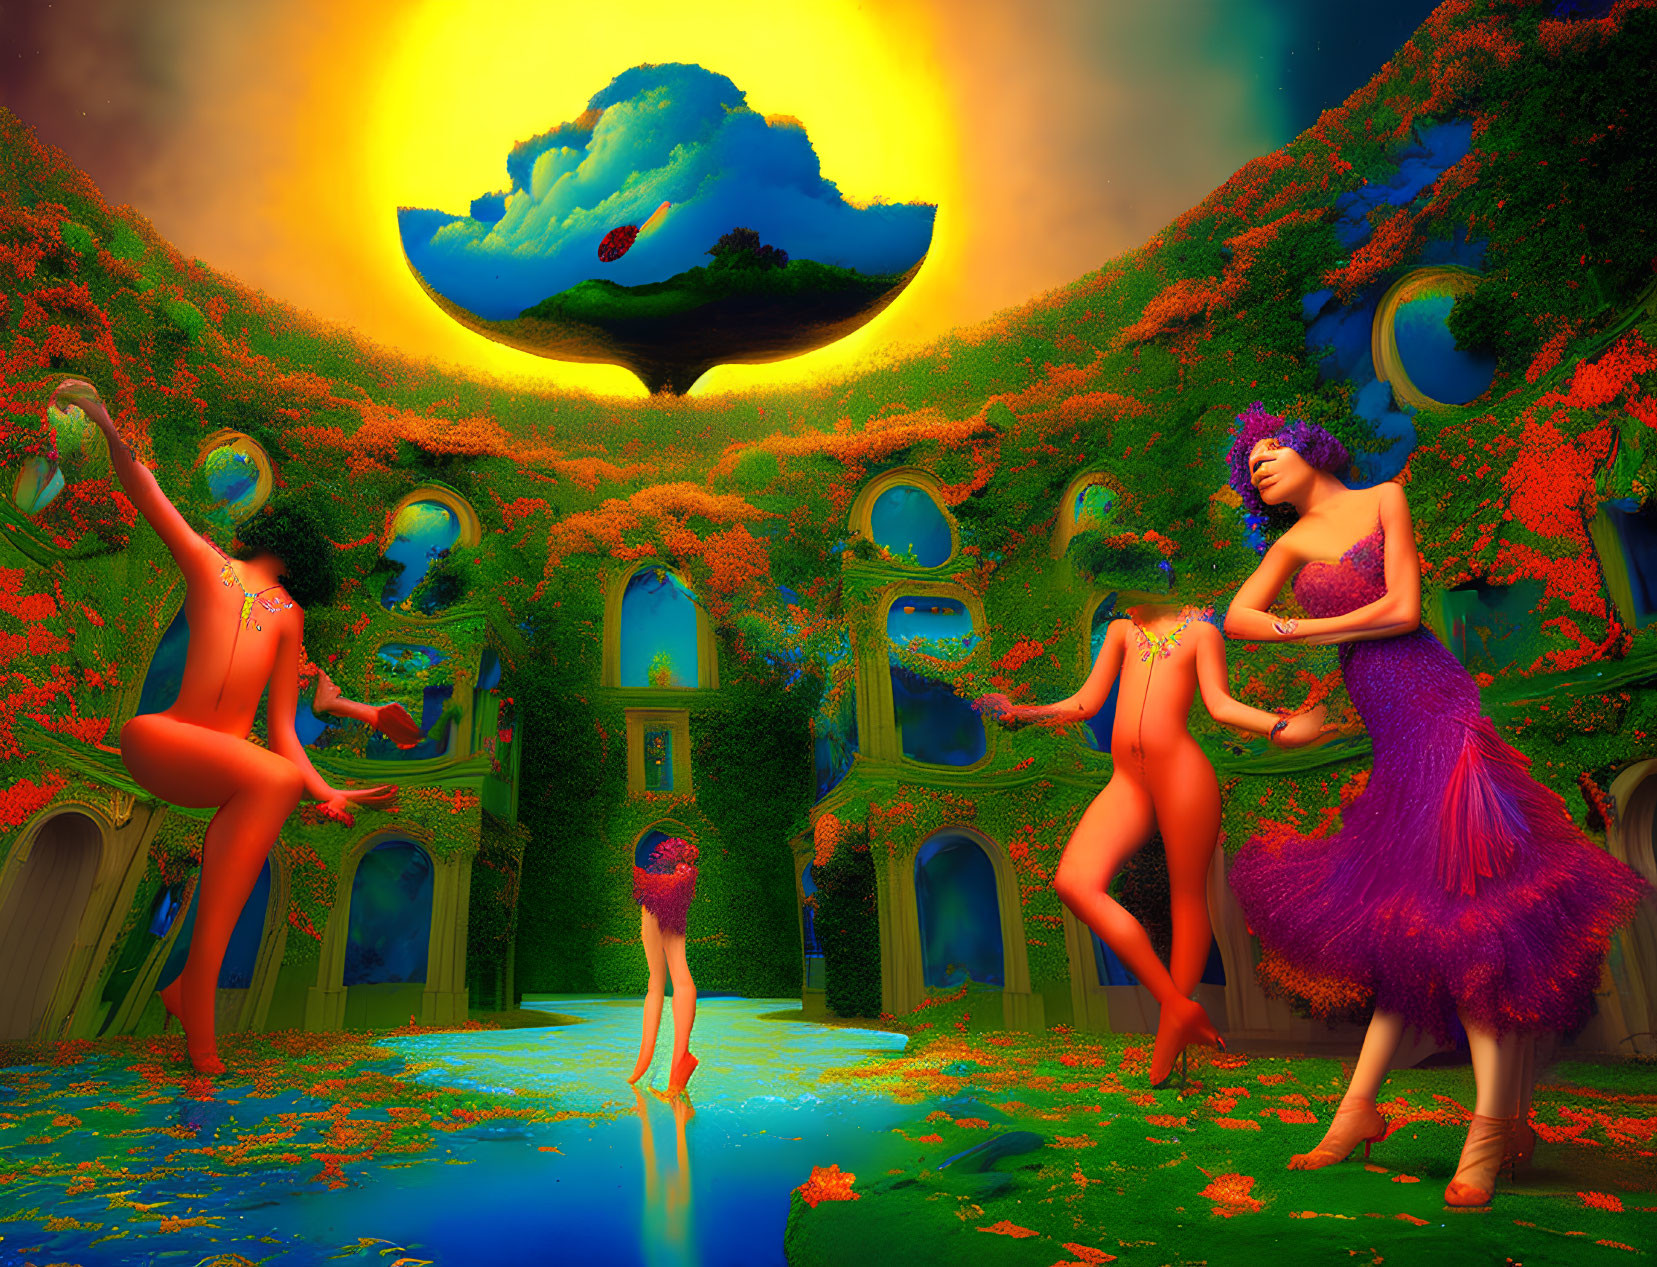 Fantasy garden with colossal yellow sun, surreal blue trees, and three women in colorful attire posing eleg